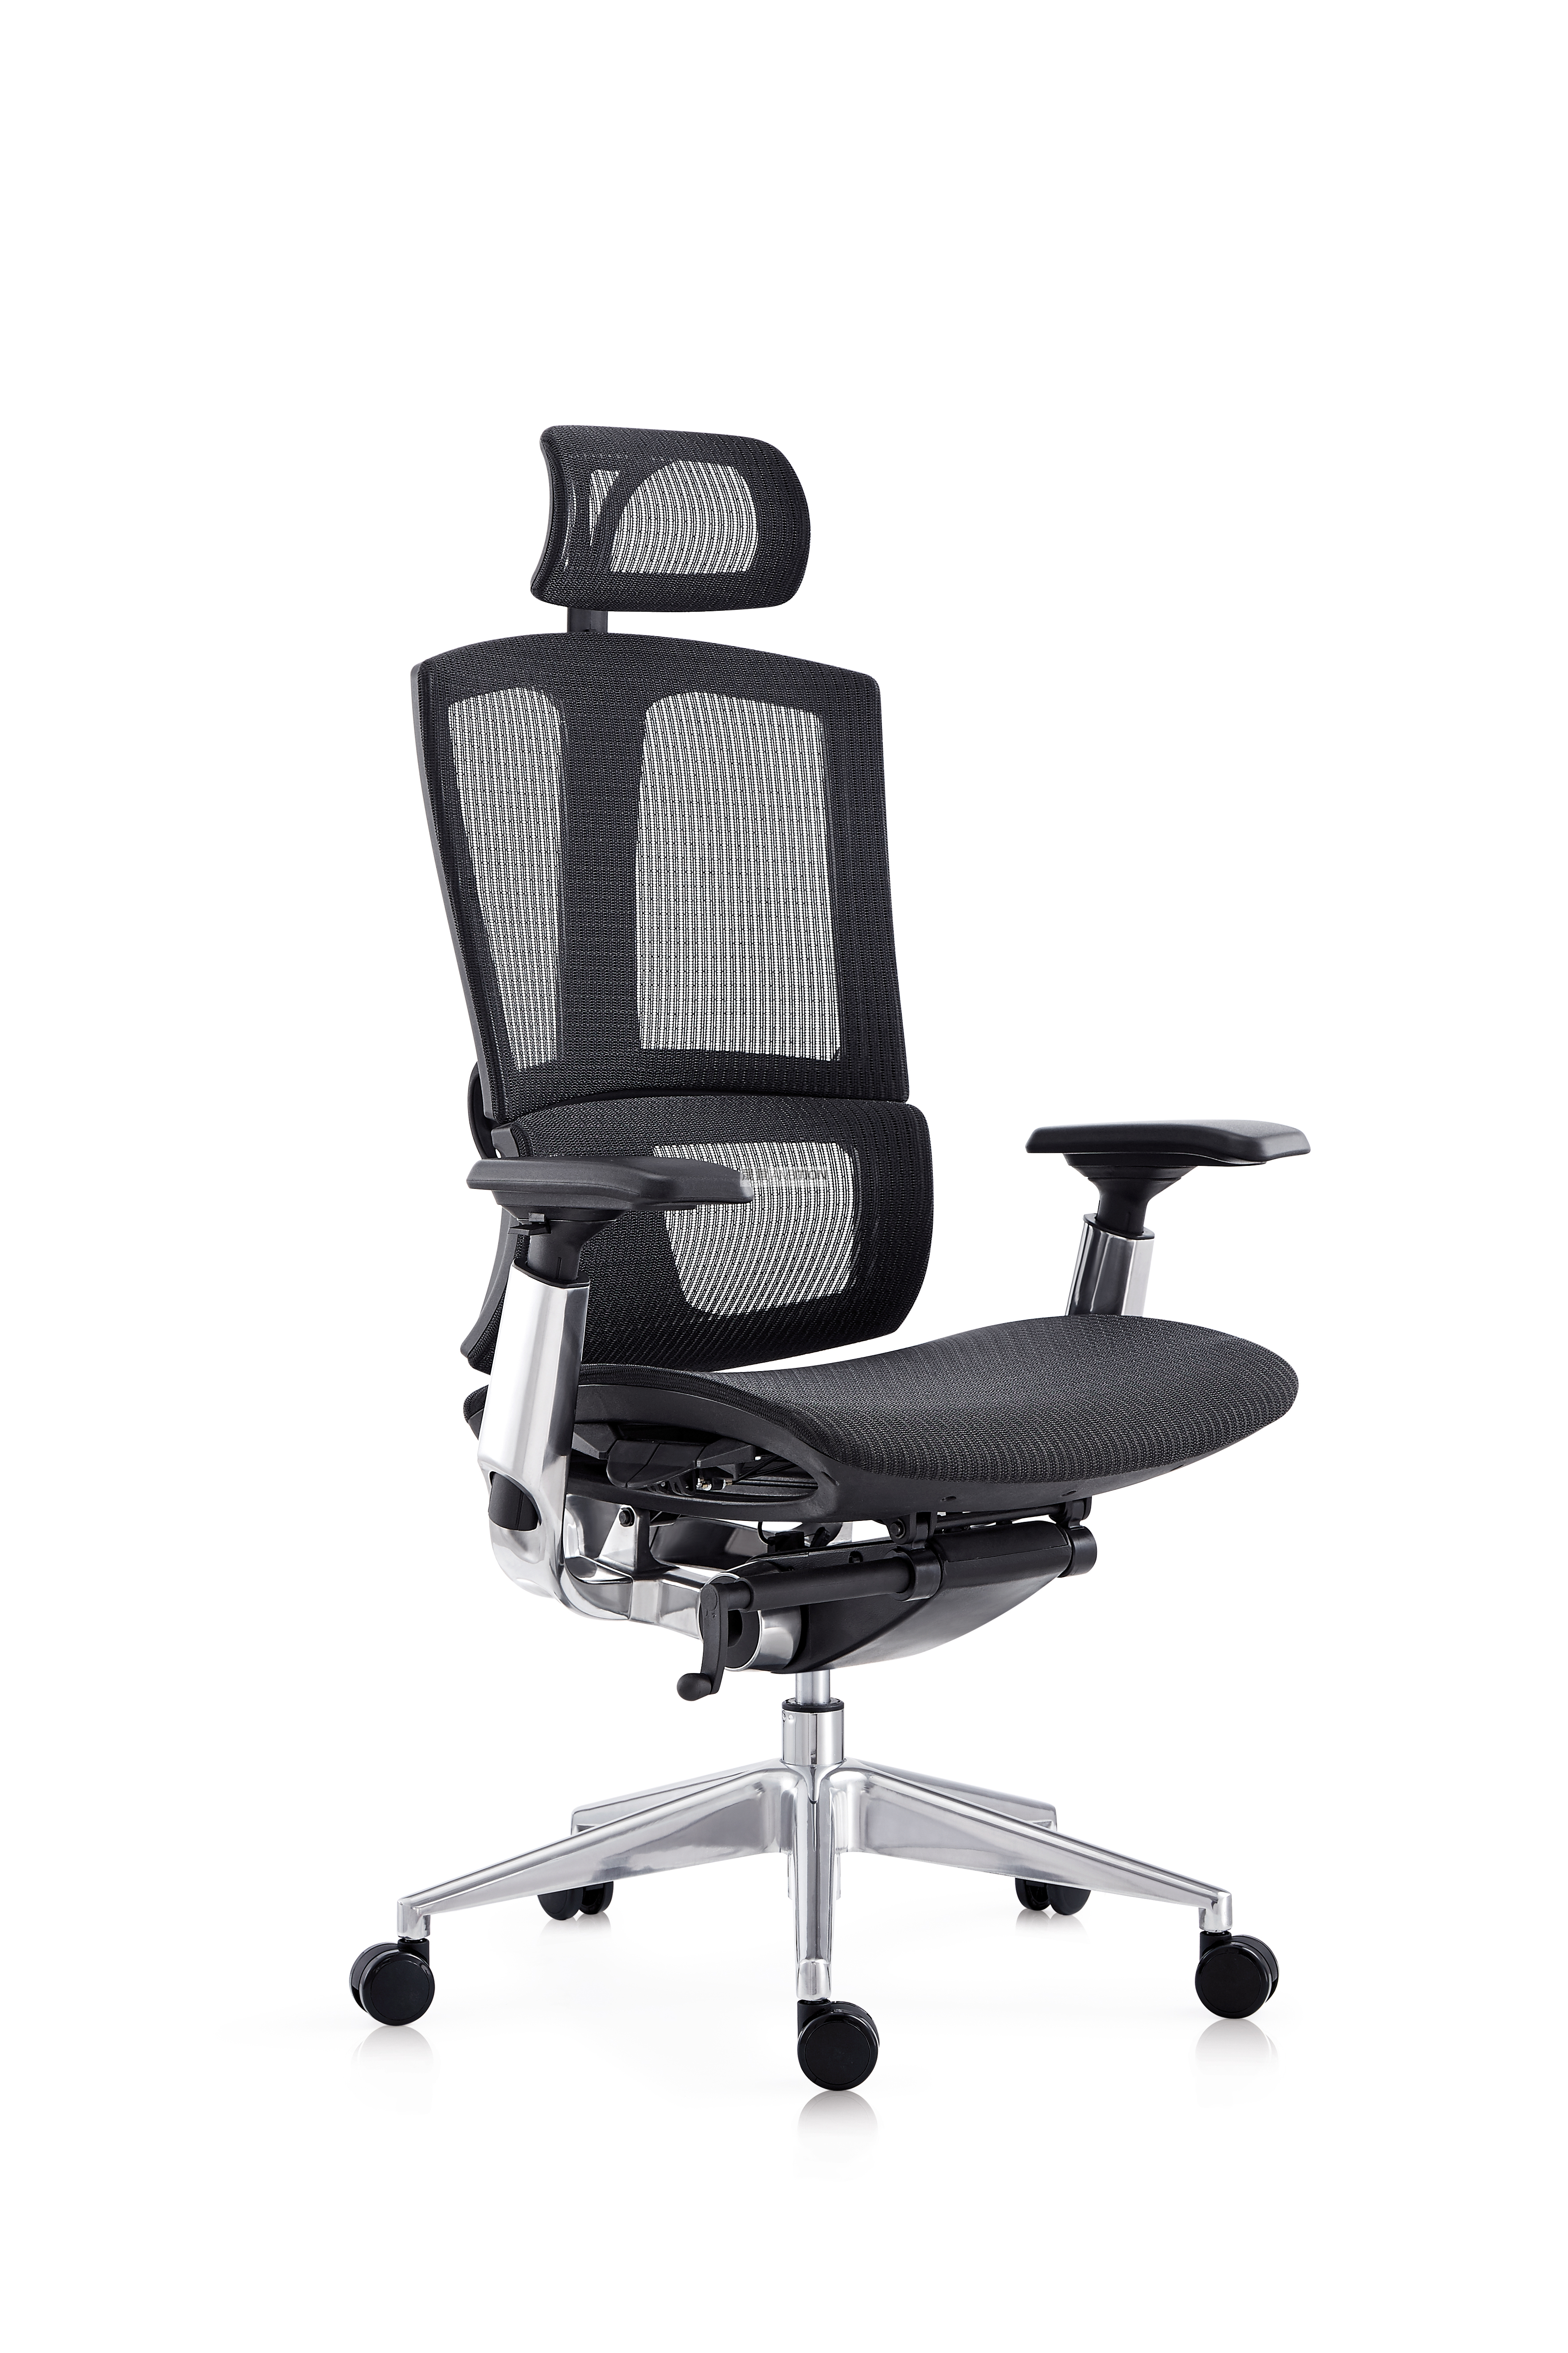  Office chair brand brings you a comfortable experience